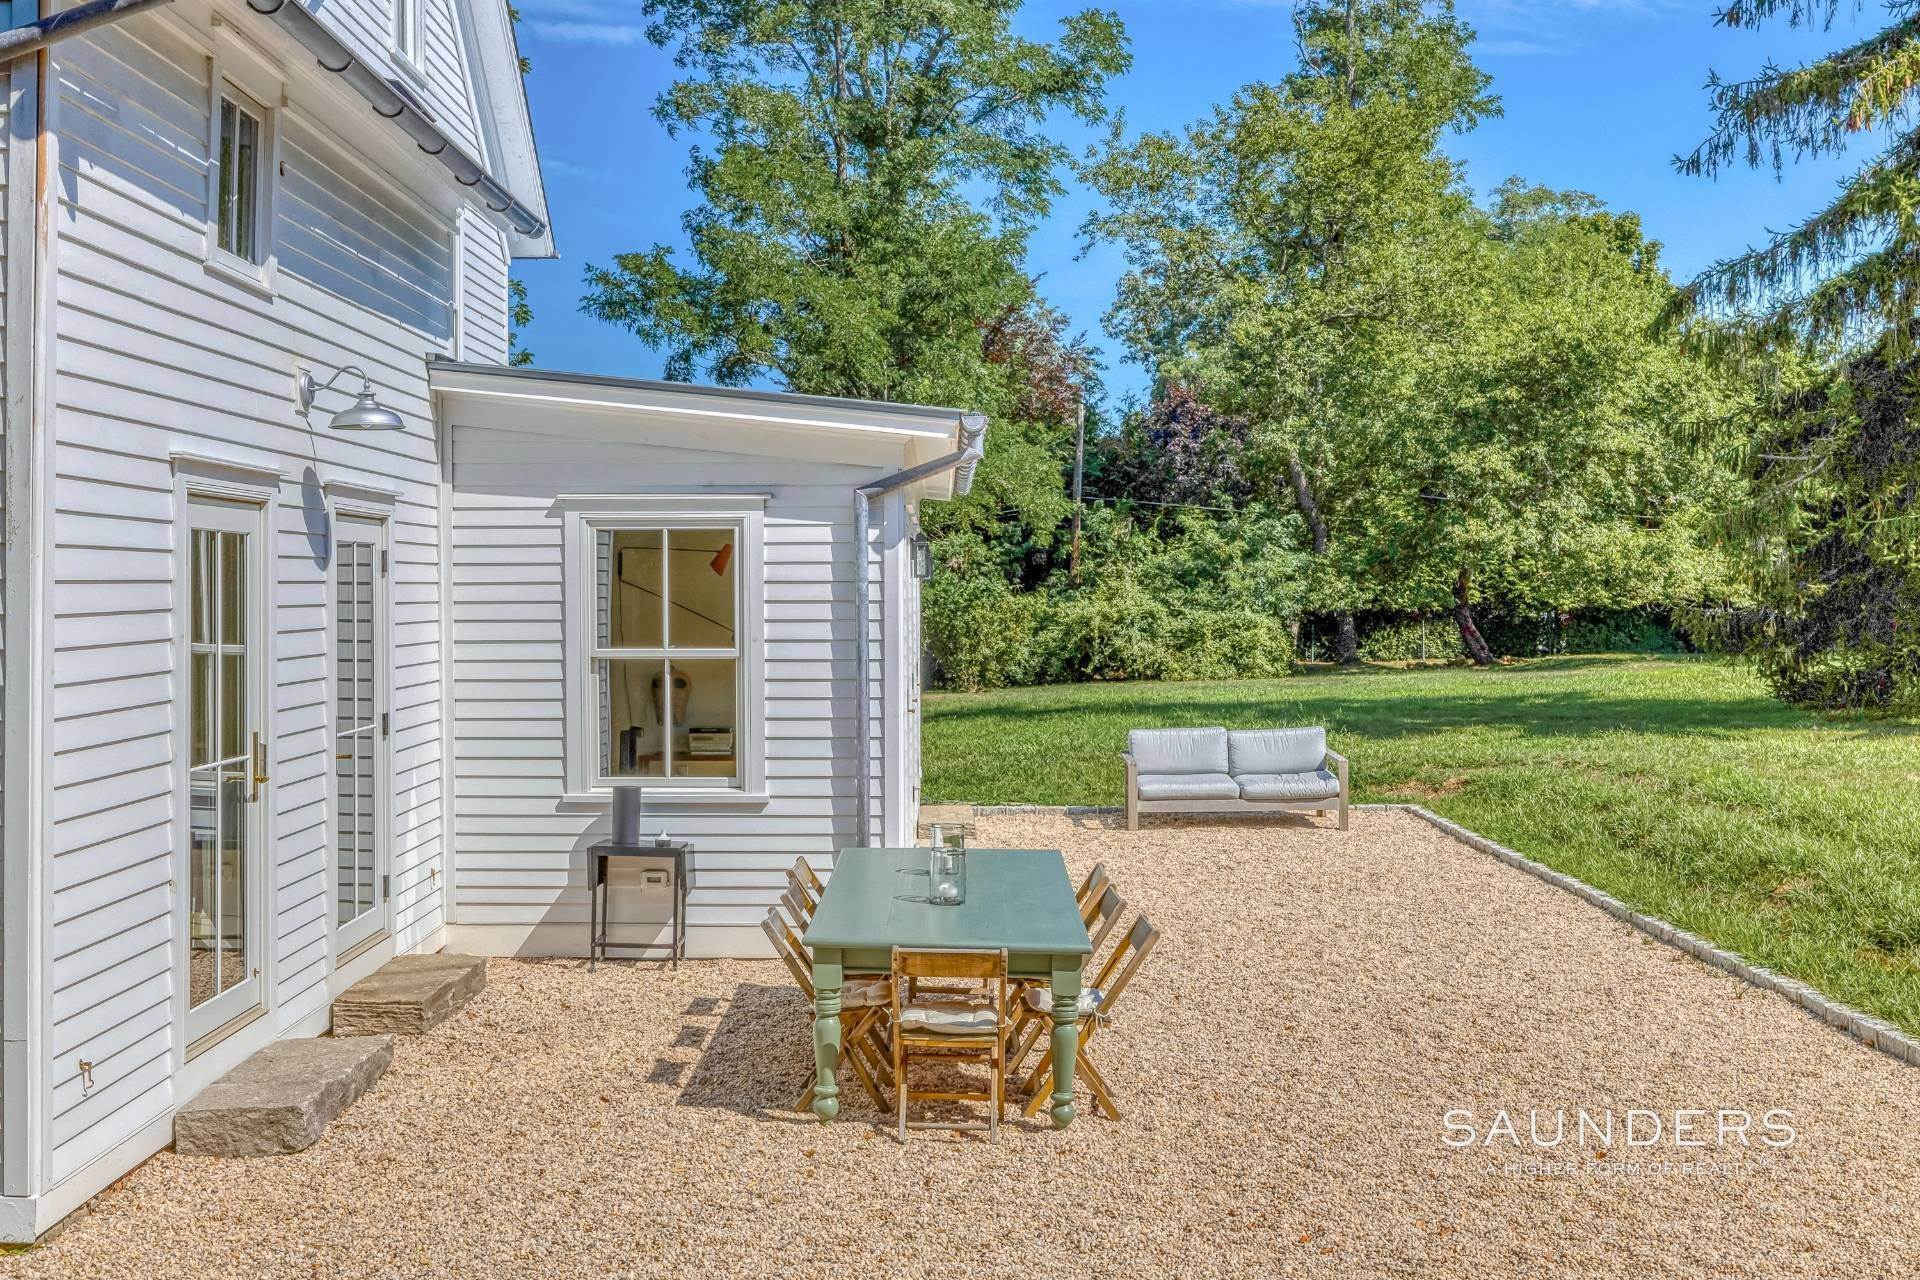 6. Single Family Homes for Sale at Shelter Island Restored 1900 Farmhouse With Barn 9 Sunshine Road, Shelter Island, NY 11964